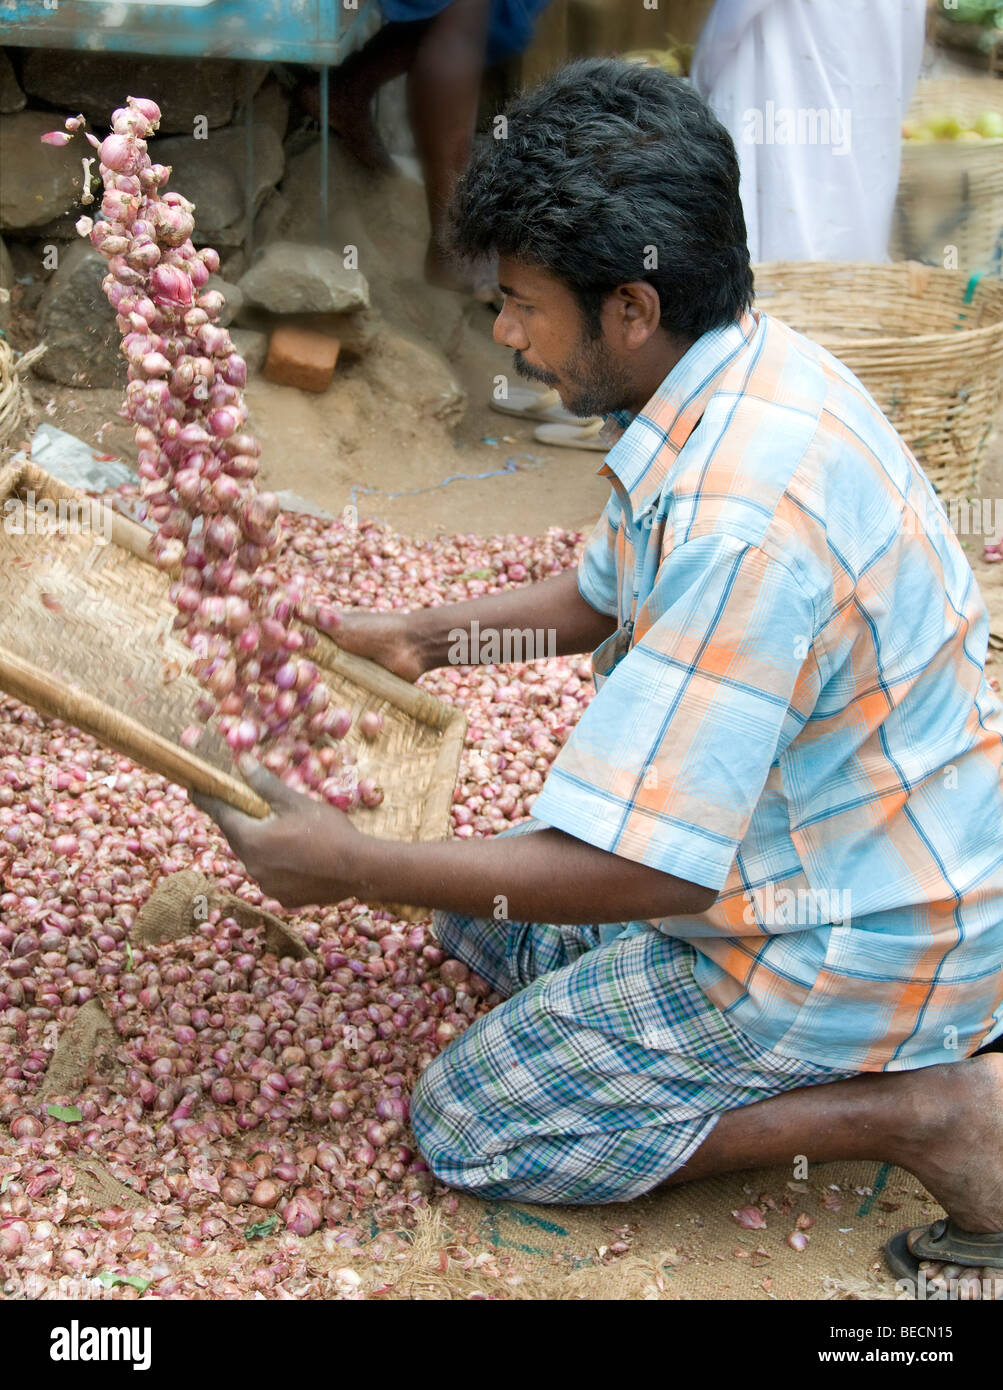 Man throwing onions in the air to clean them on  Bazaar Road, Mattancherry, Cochin, Kerala, India Stock Photo